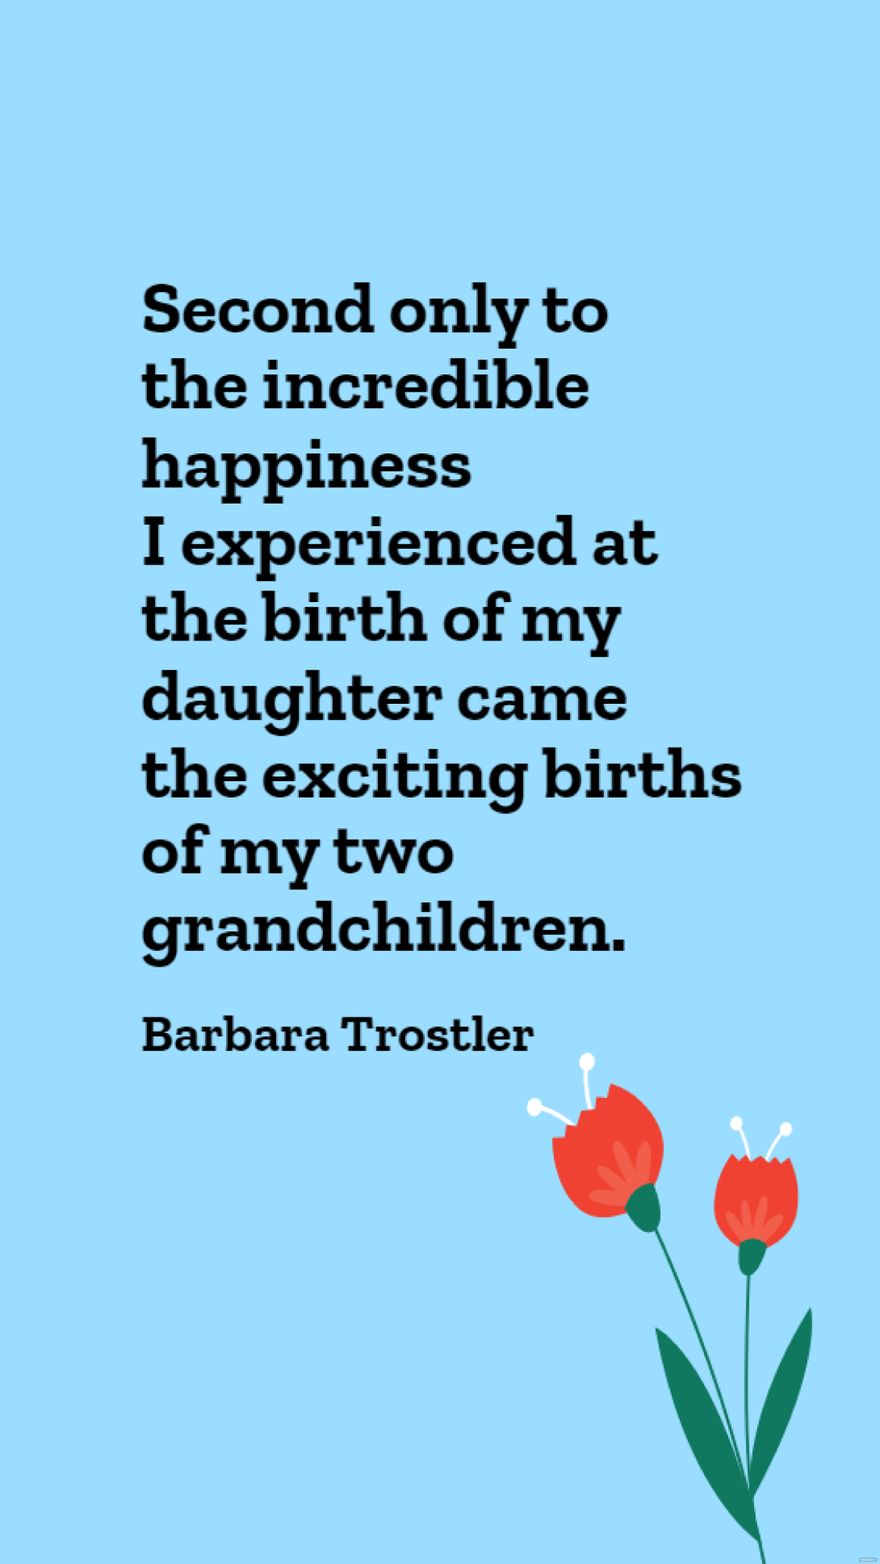 Barbara Trostler - Second only to the incredible happiness I experienced at the birth of my daughter came the exciting births of my two grandchildren.